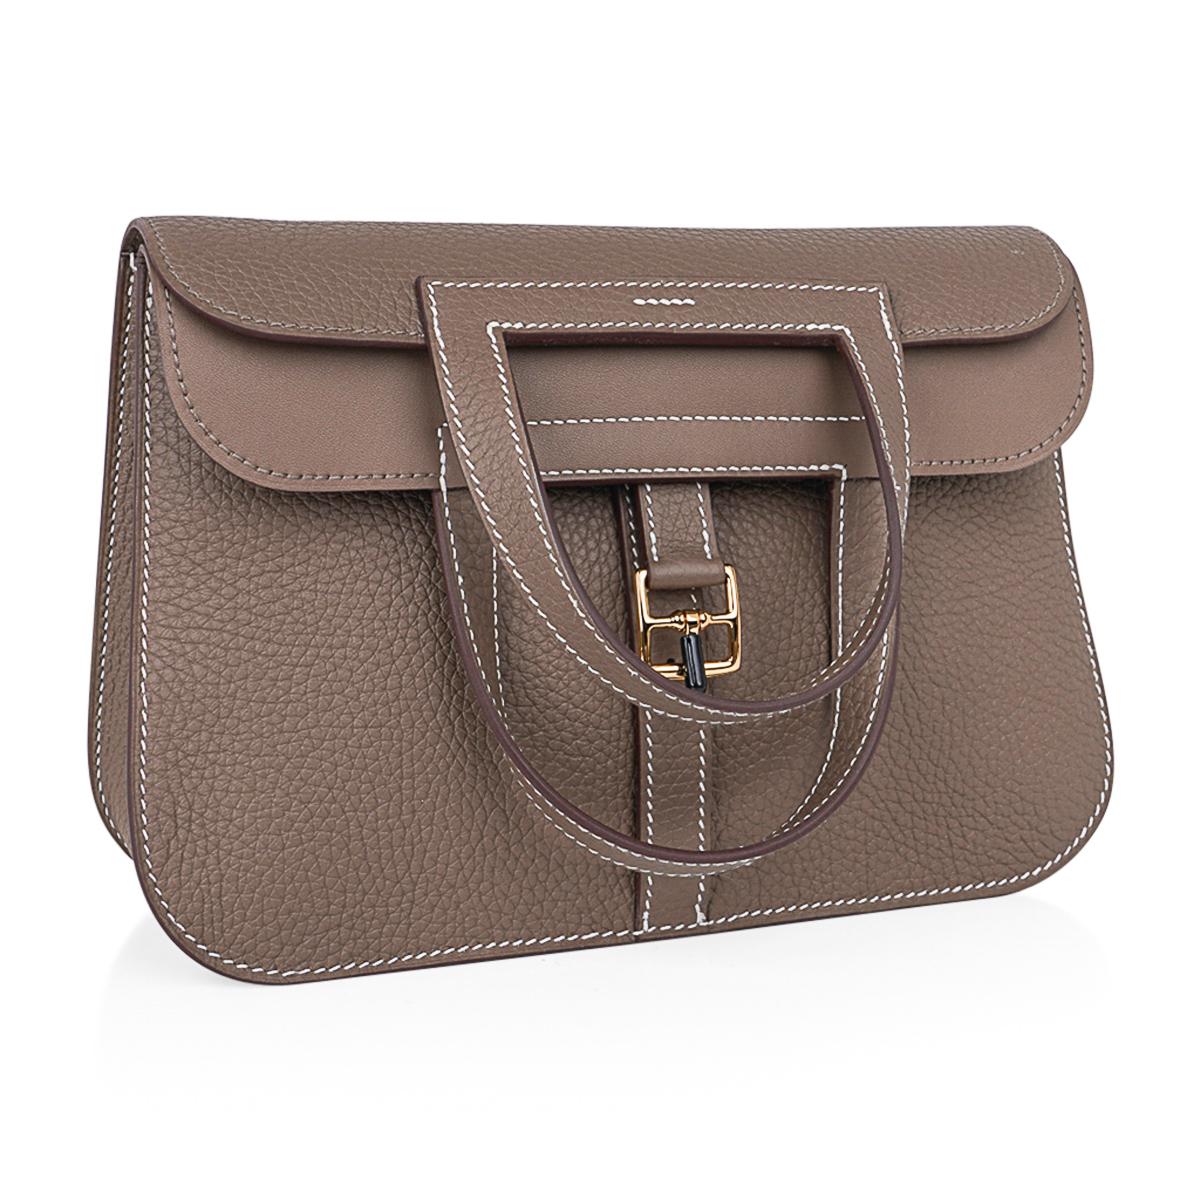 Mightychic offers an Hermes Halzan 25 bag featured in Etoupe Clemence leather.
Lush with Gold hardware.
Plush Clemence leather.
Versatile three-way bag.
The Hermes Halzan bag is a fresh take on the messenger with the crossbody strap.
Fold over with